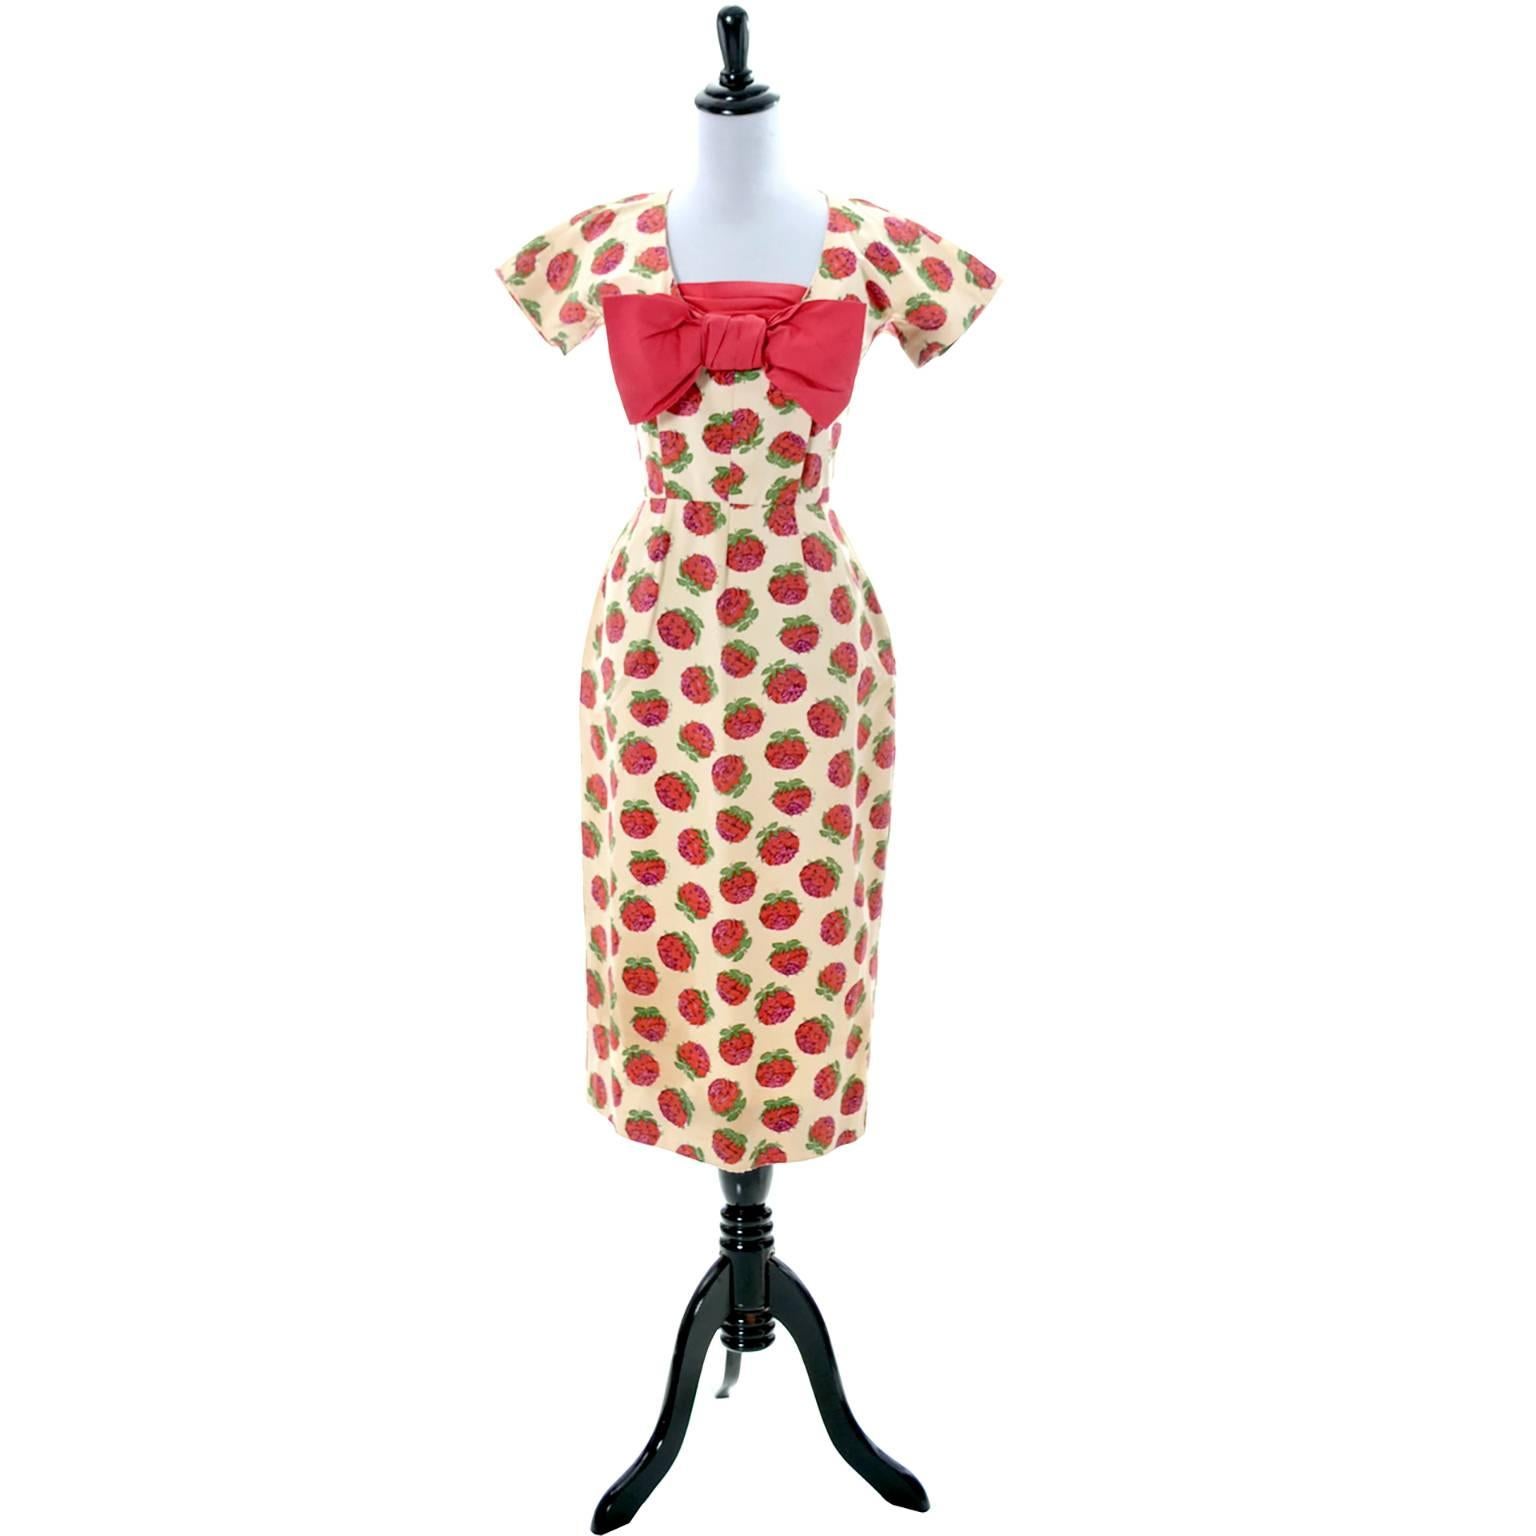 This is an exceptionally well designed 2 piece dress from Christian Dior. This 1950's Dior dress has a red bow and a detachable shawl 